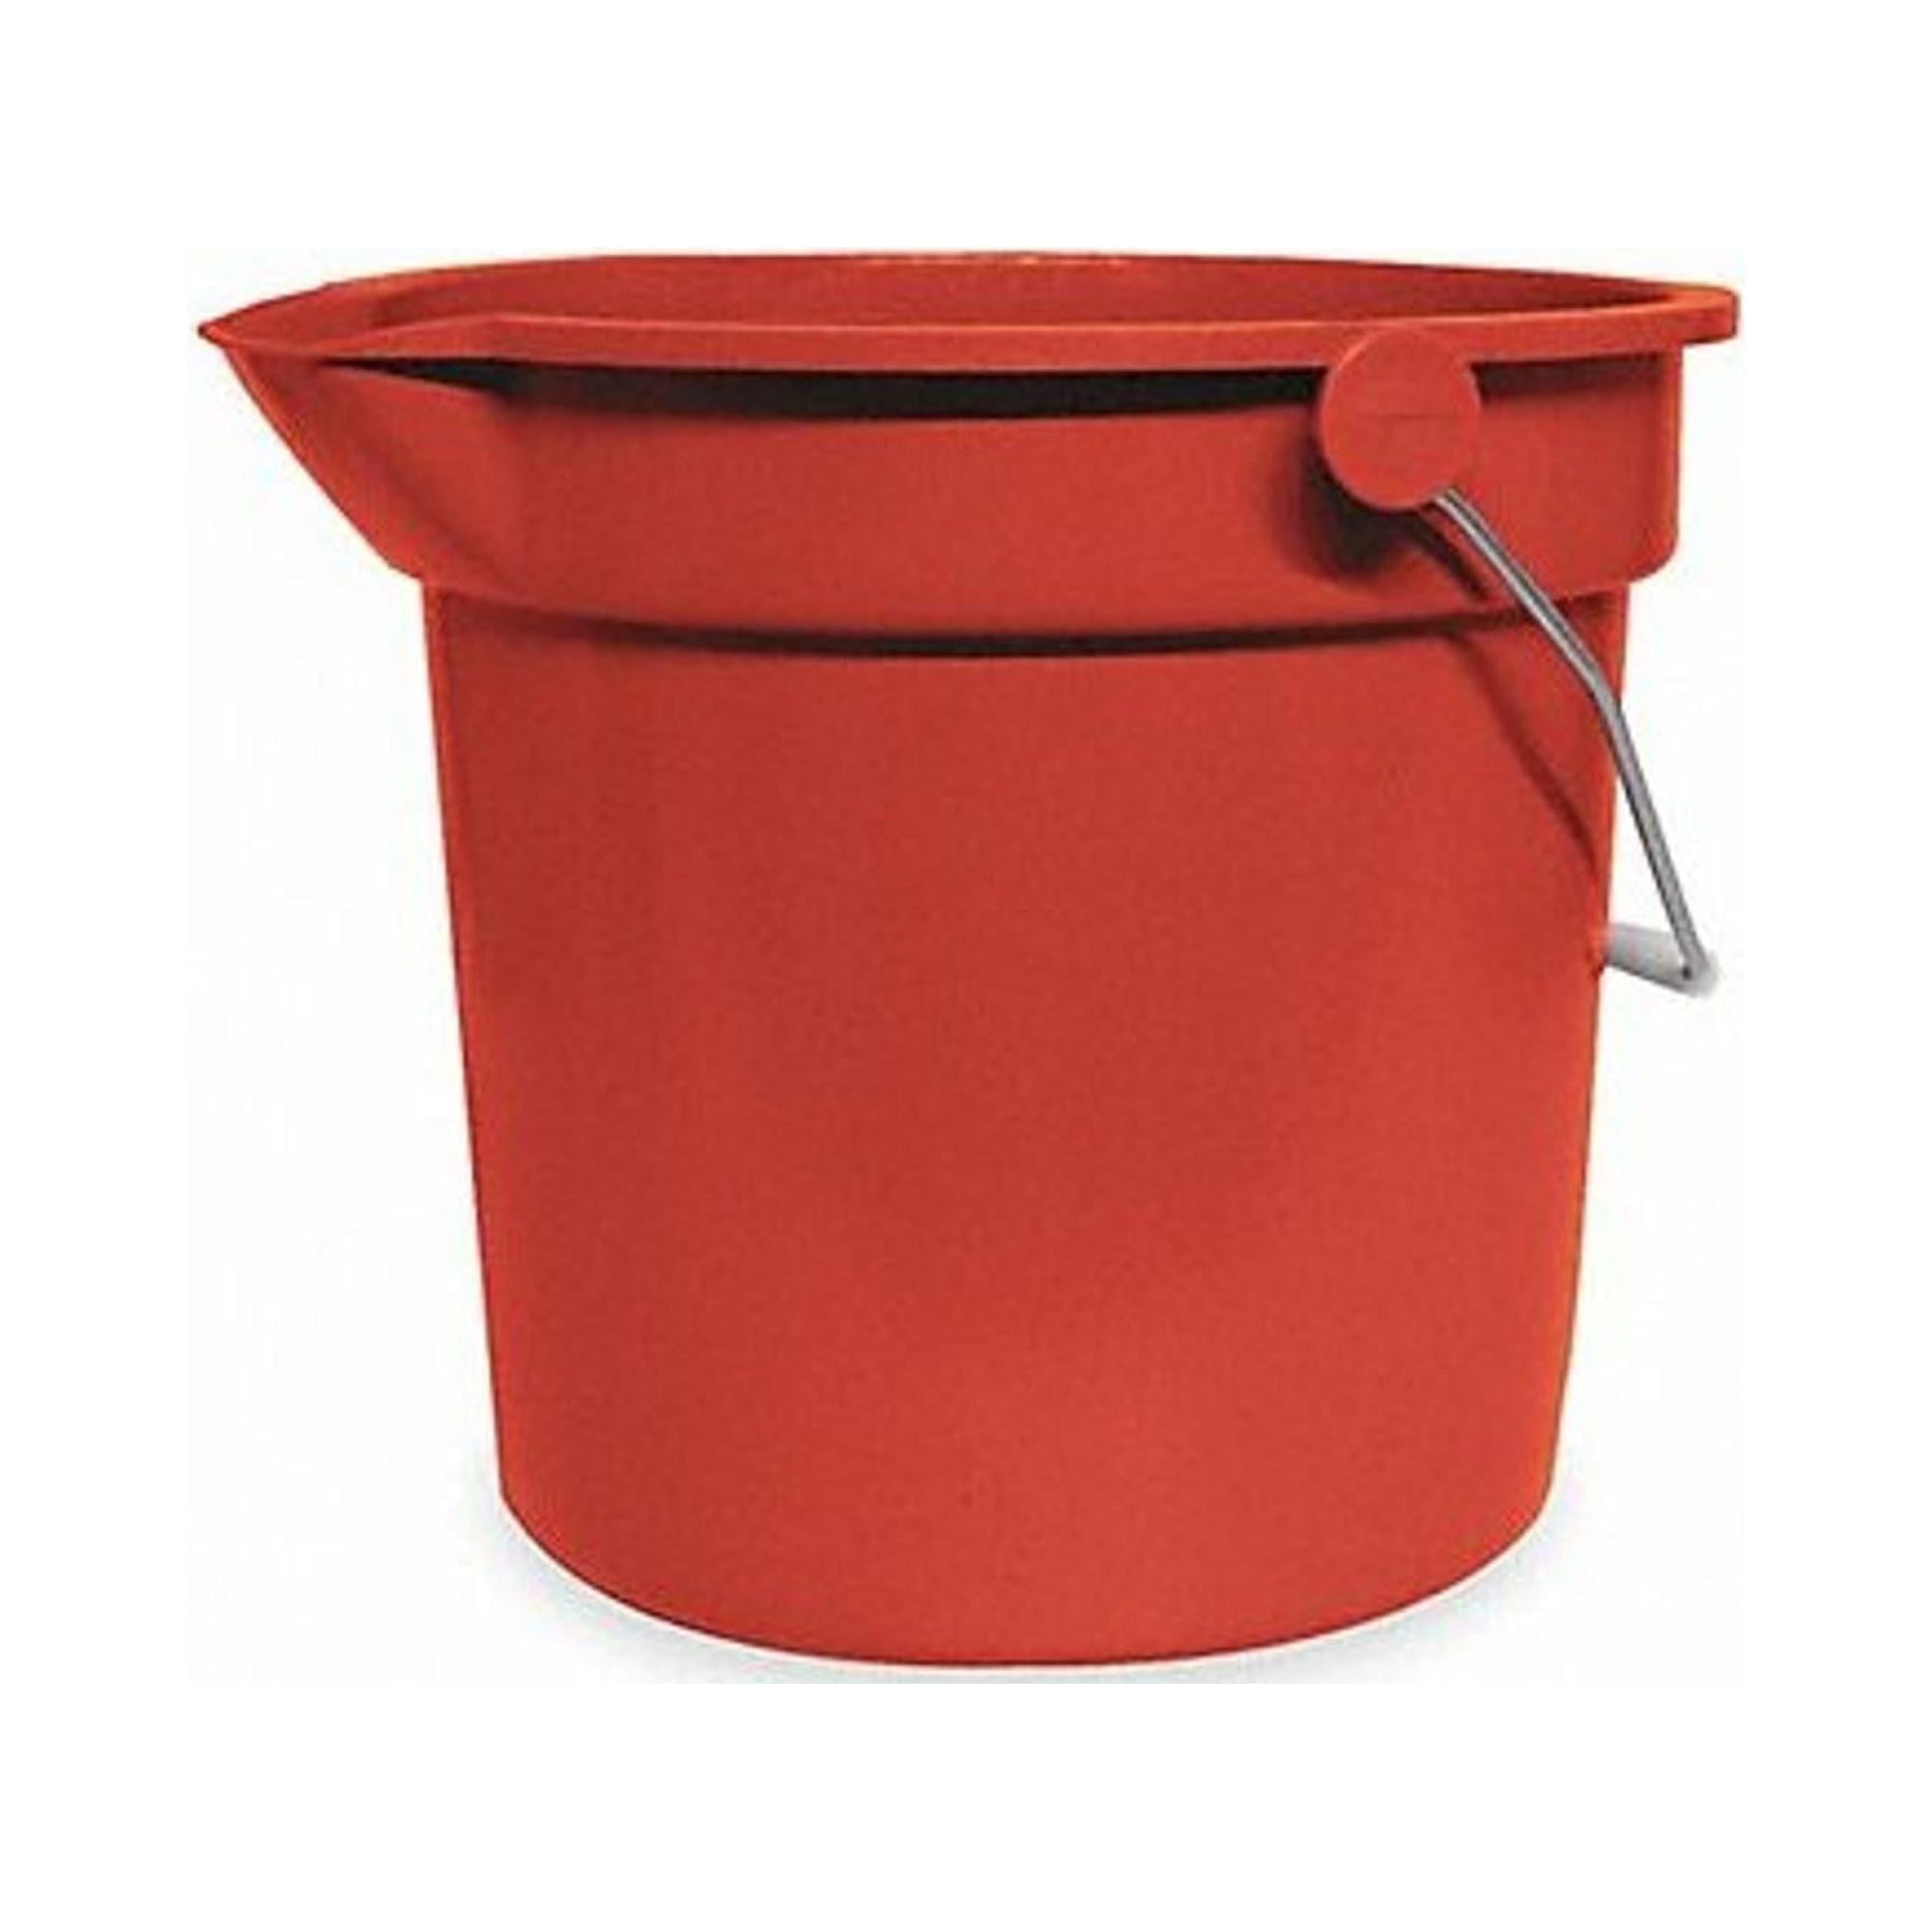 Foldable Pail Bucket Set of 3 - Collapsible Buckets for Beach